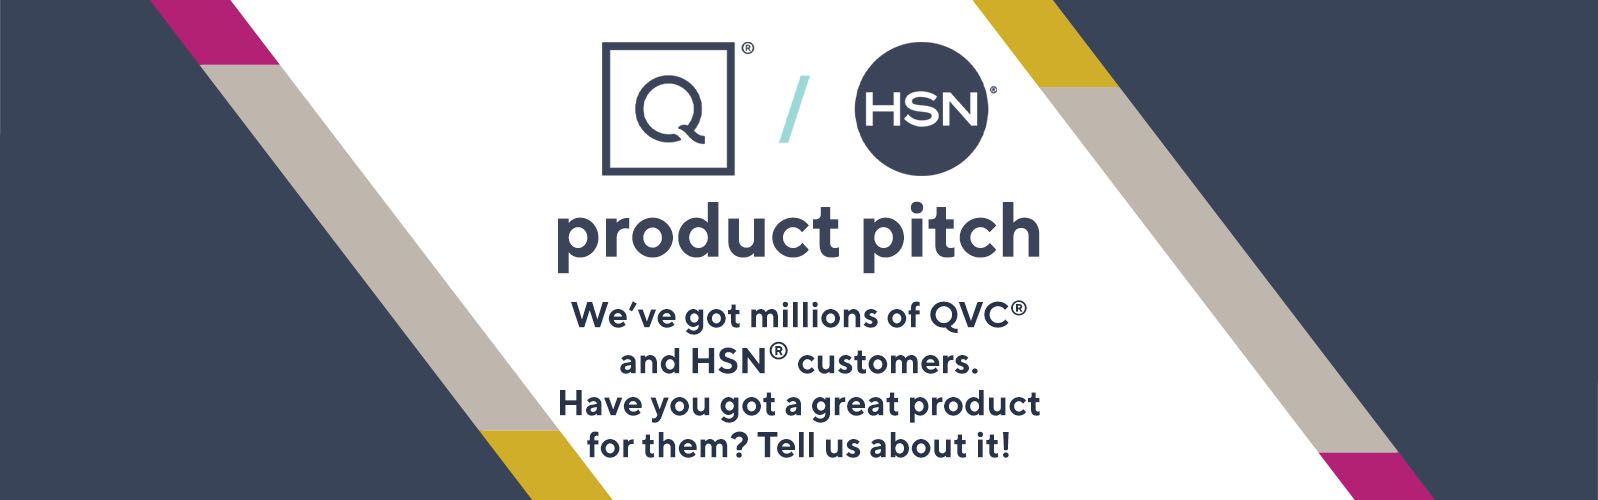 QVC/HSN.  We've got millions of QVC® and HSN® customers. Have you got a great product for them? Tell us about it!